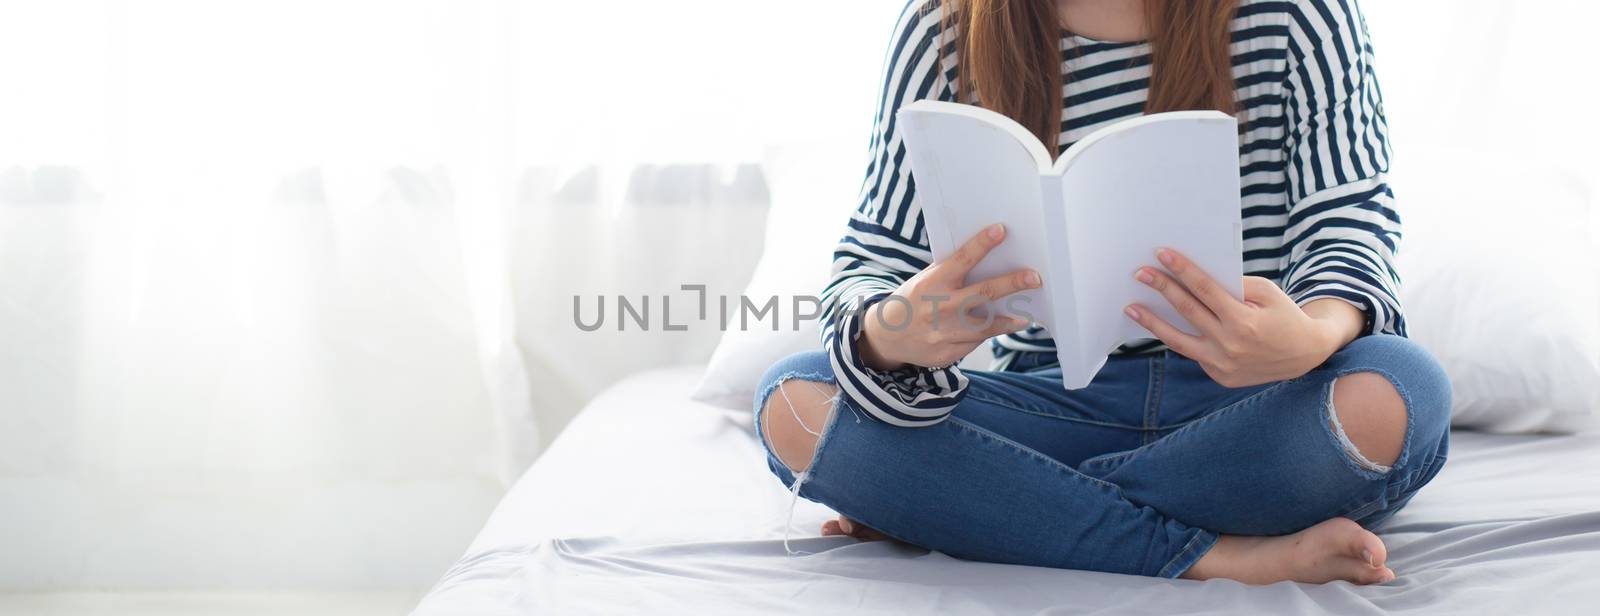 Banner website beautiful asian woman relax sitting reading book  by nnudoo